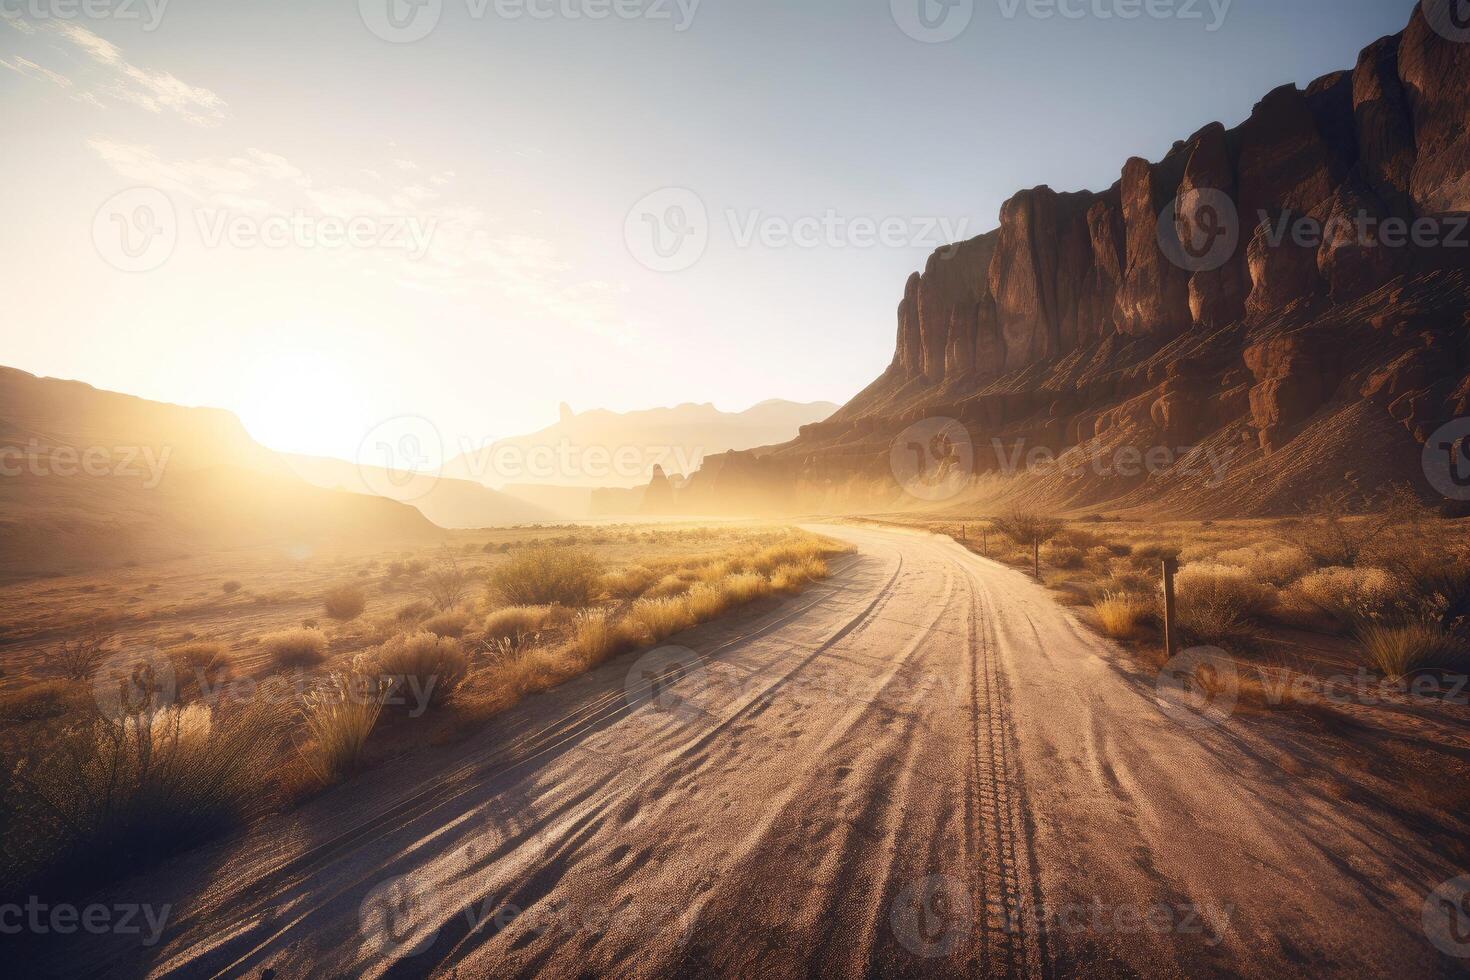 straight asphalt road running through a desert valley flanked by towering rocky cliffs, photo